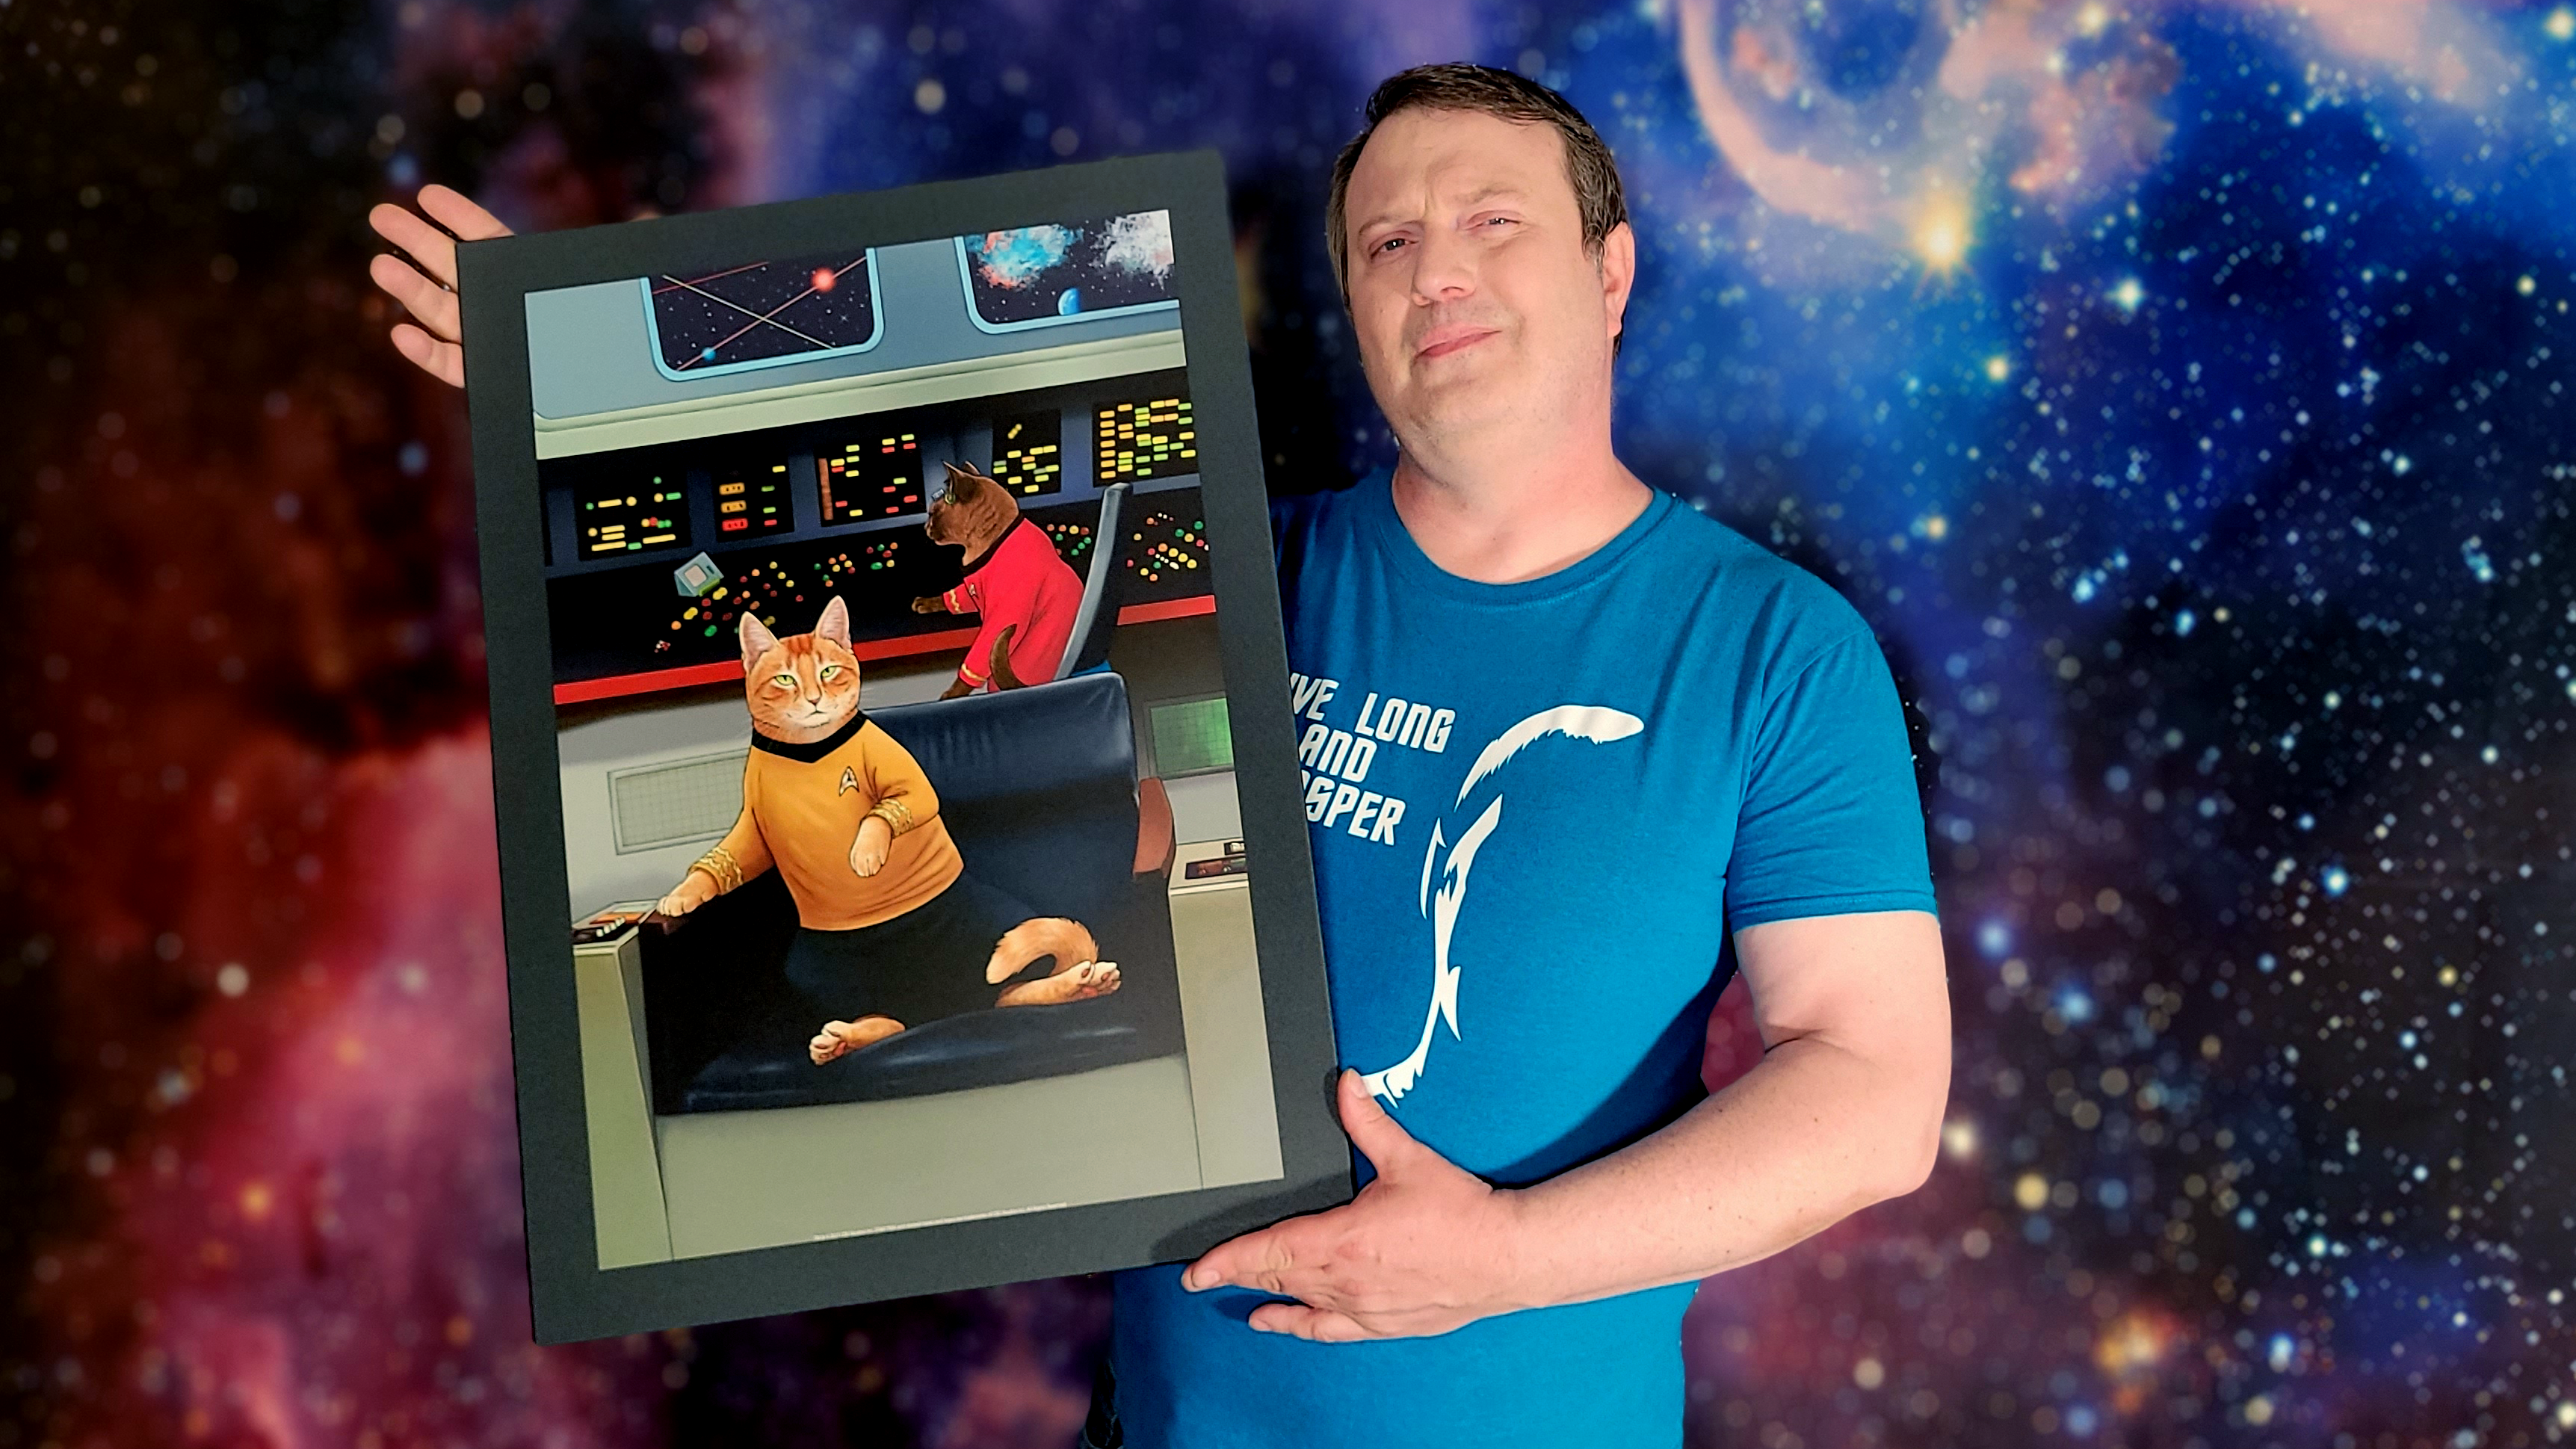 Captain Kyle holding a Displate poster of cats as Star Trek characters